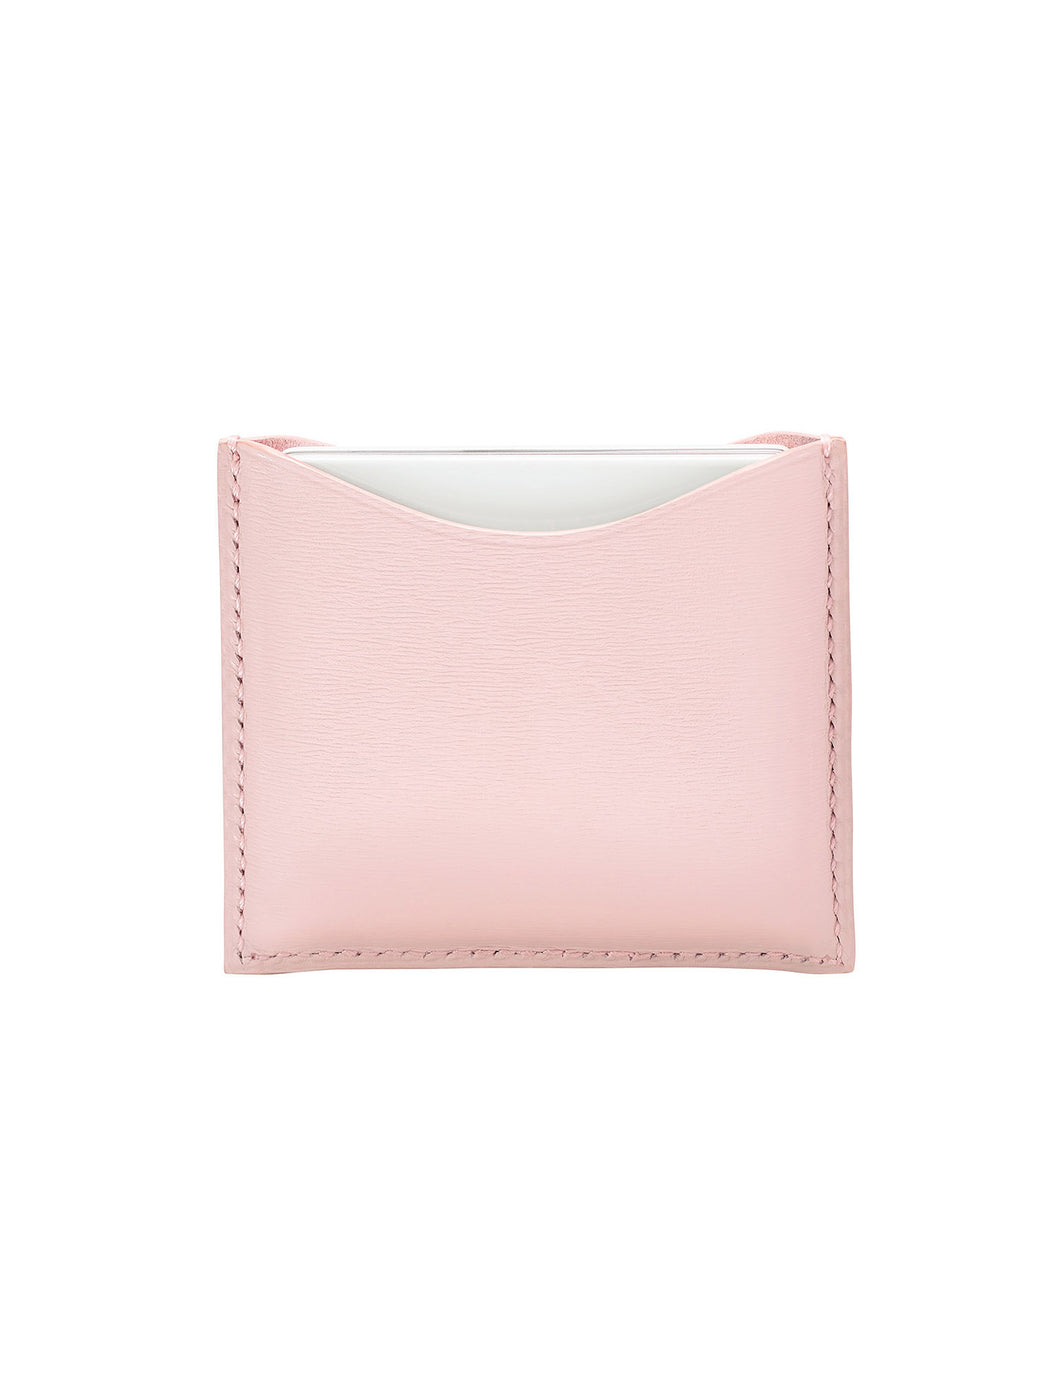 Rose Fine Leather Refillable Compact Case